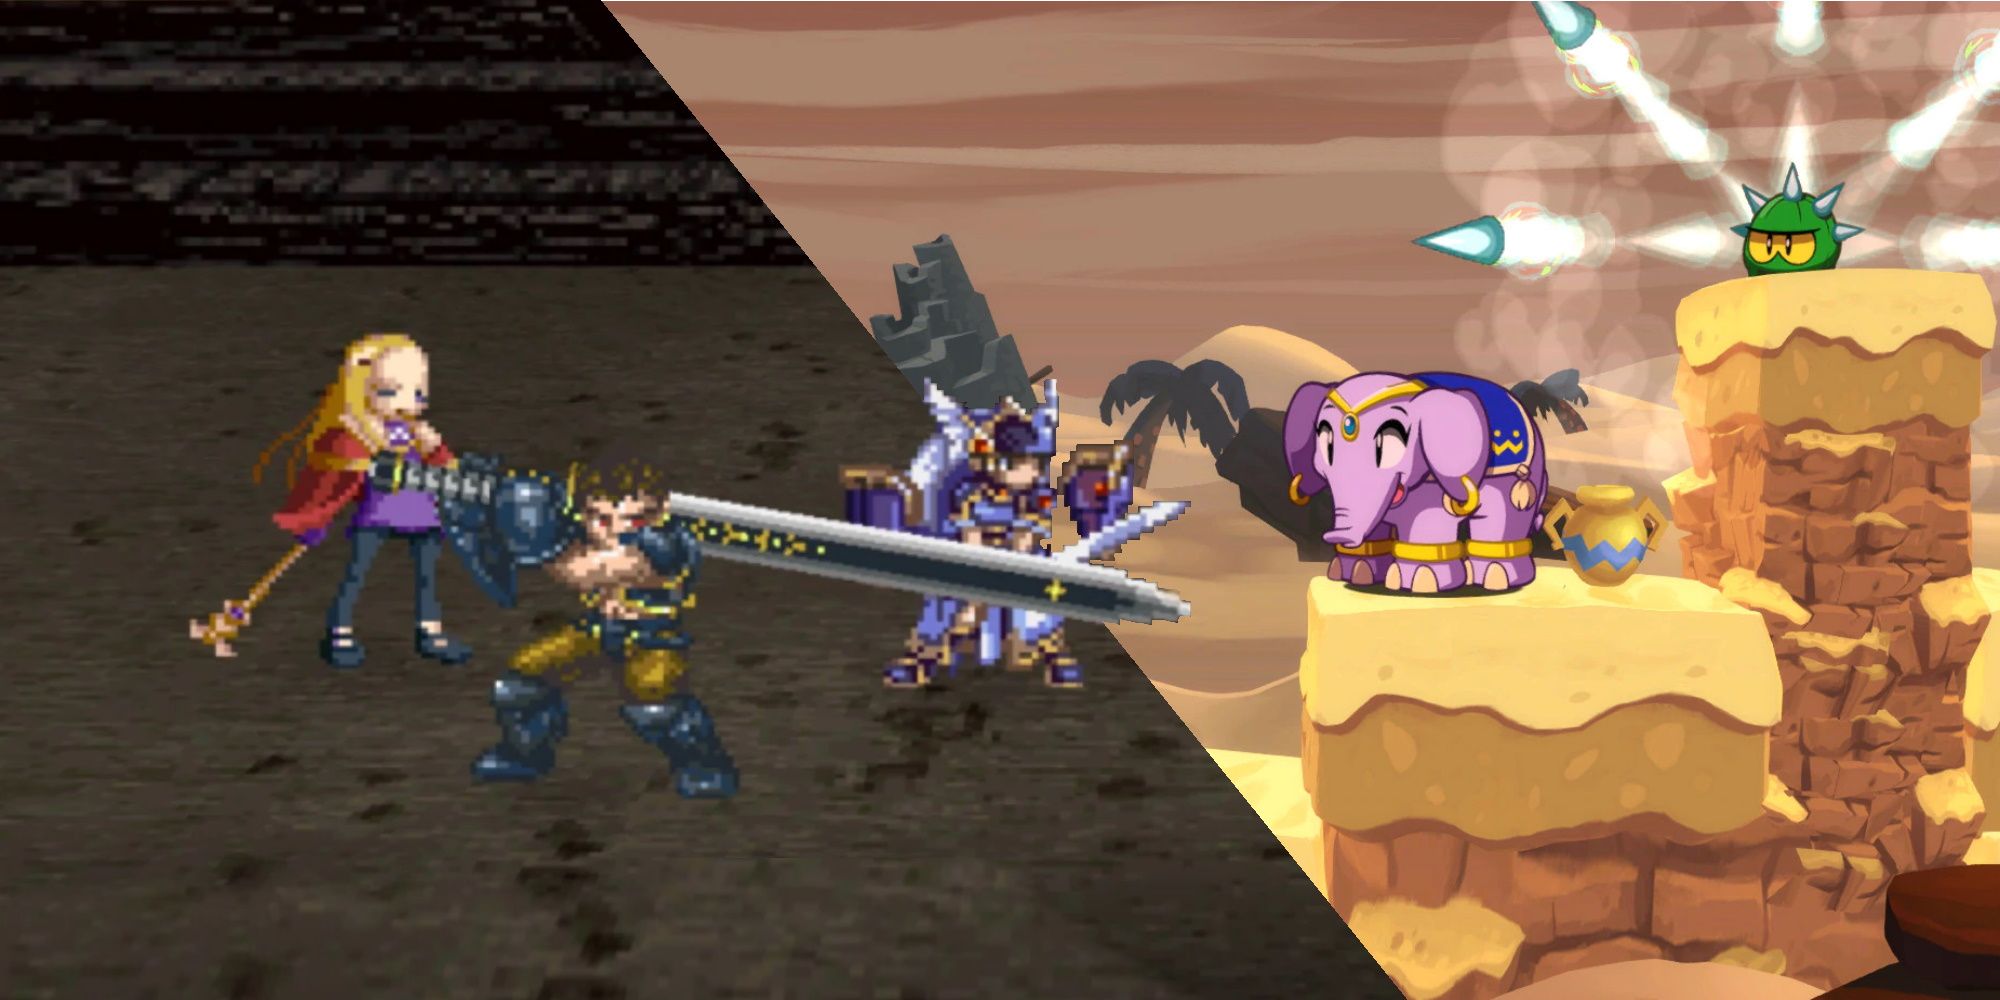 Best Games To Combine Polygons And Sprites Featured Image (with images taken from Valkyrie Profile and Half-Genie Hero)